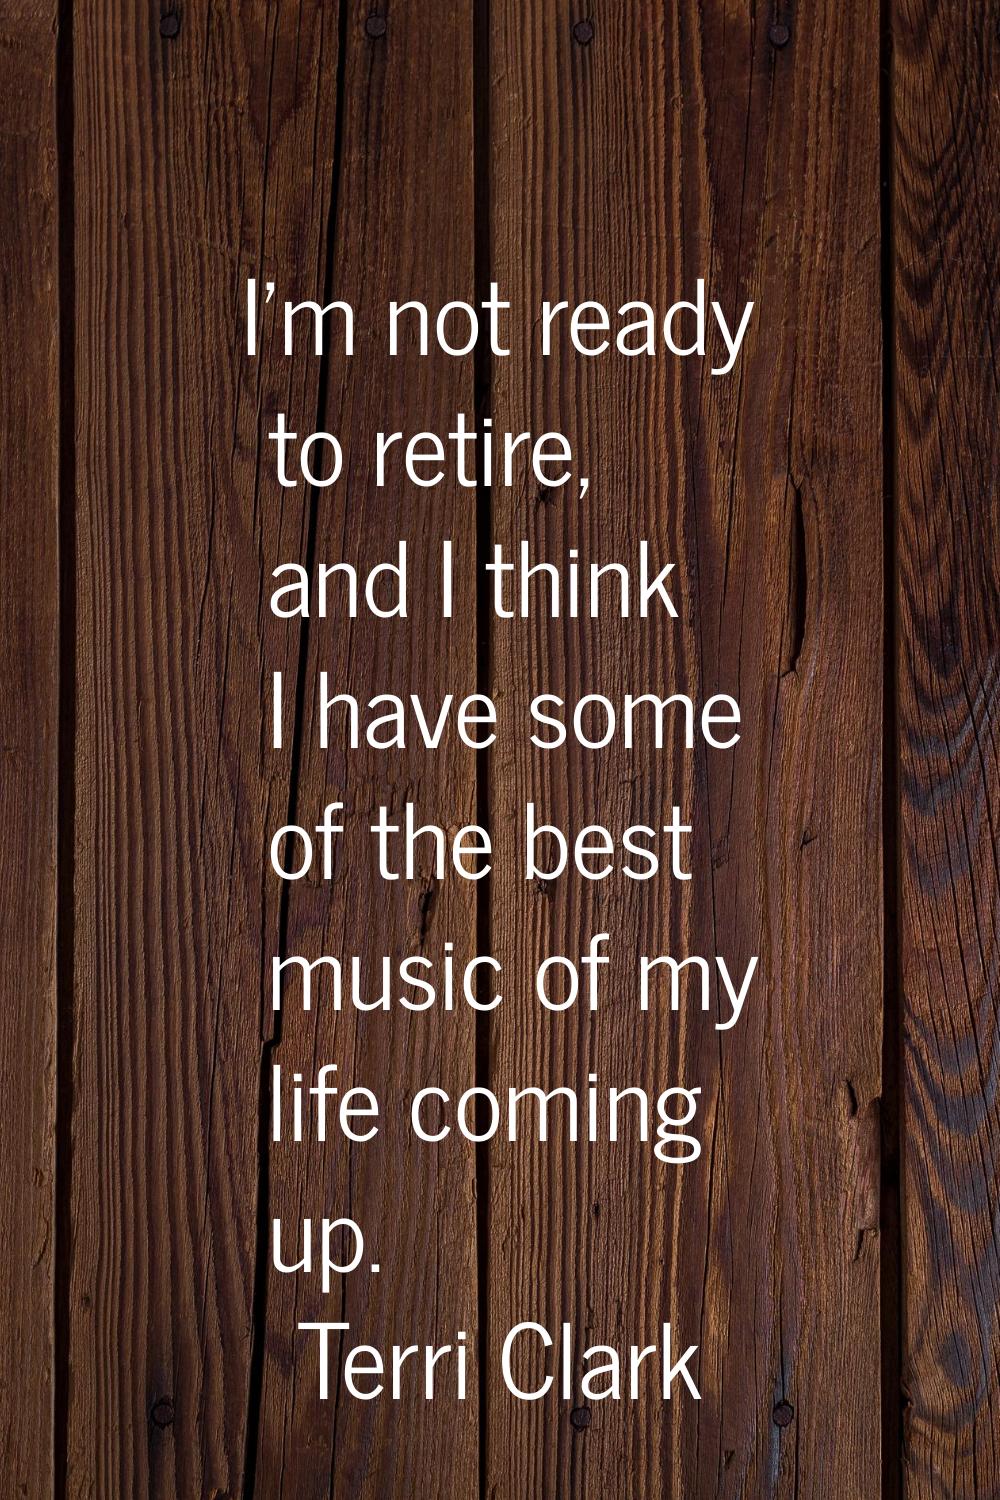 I'm not ready to retire, and I think I have some of the best music of my life coming up.